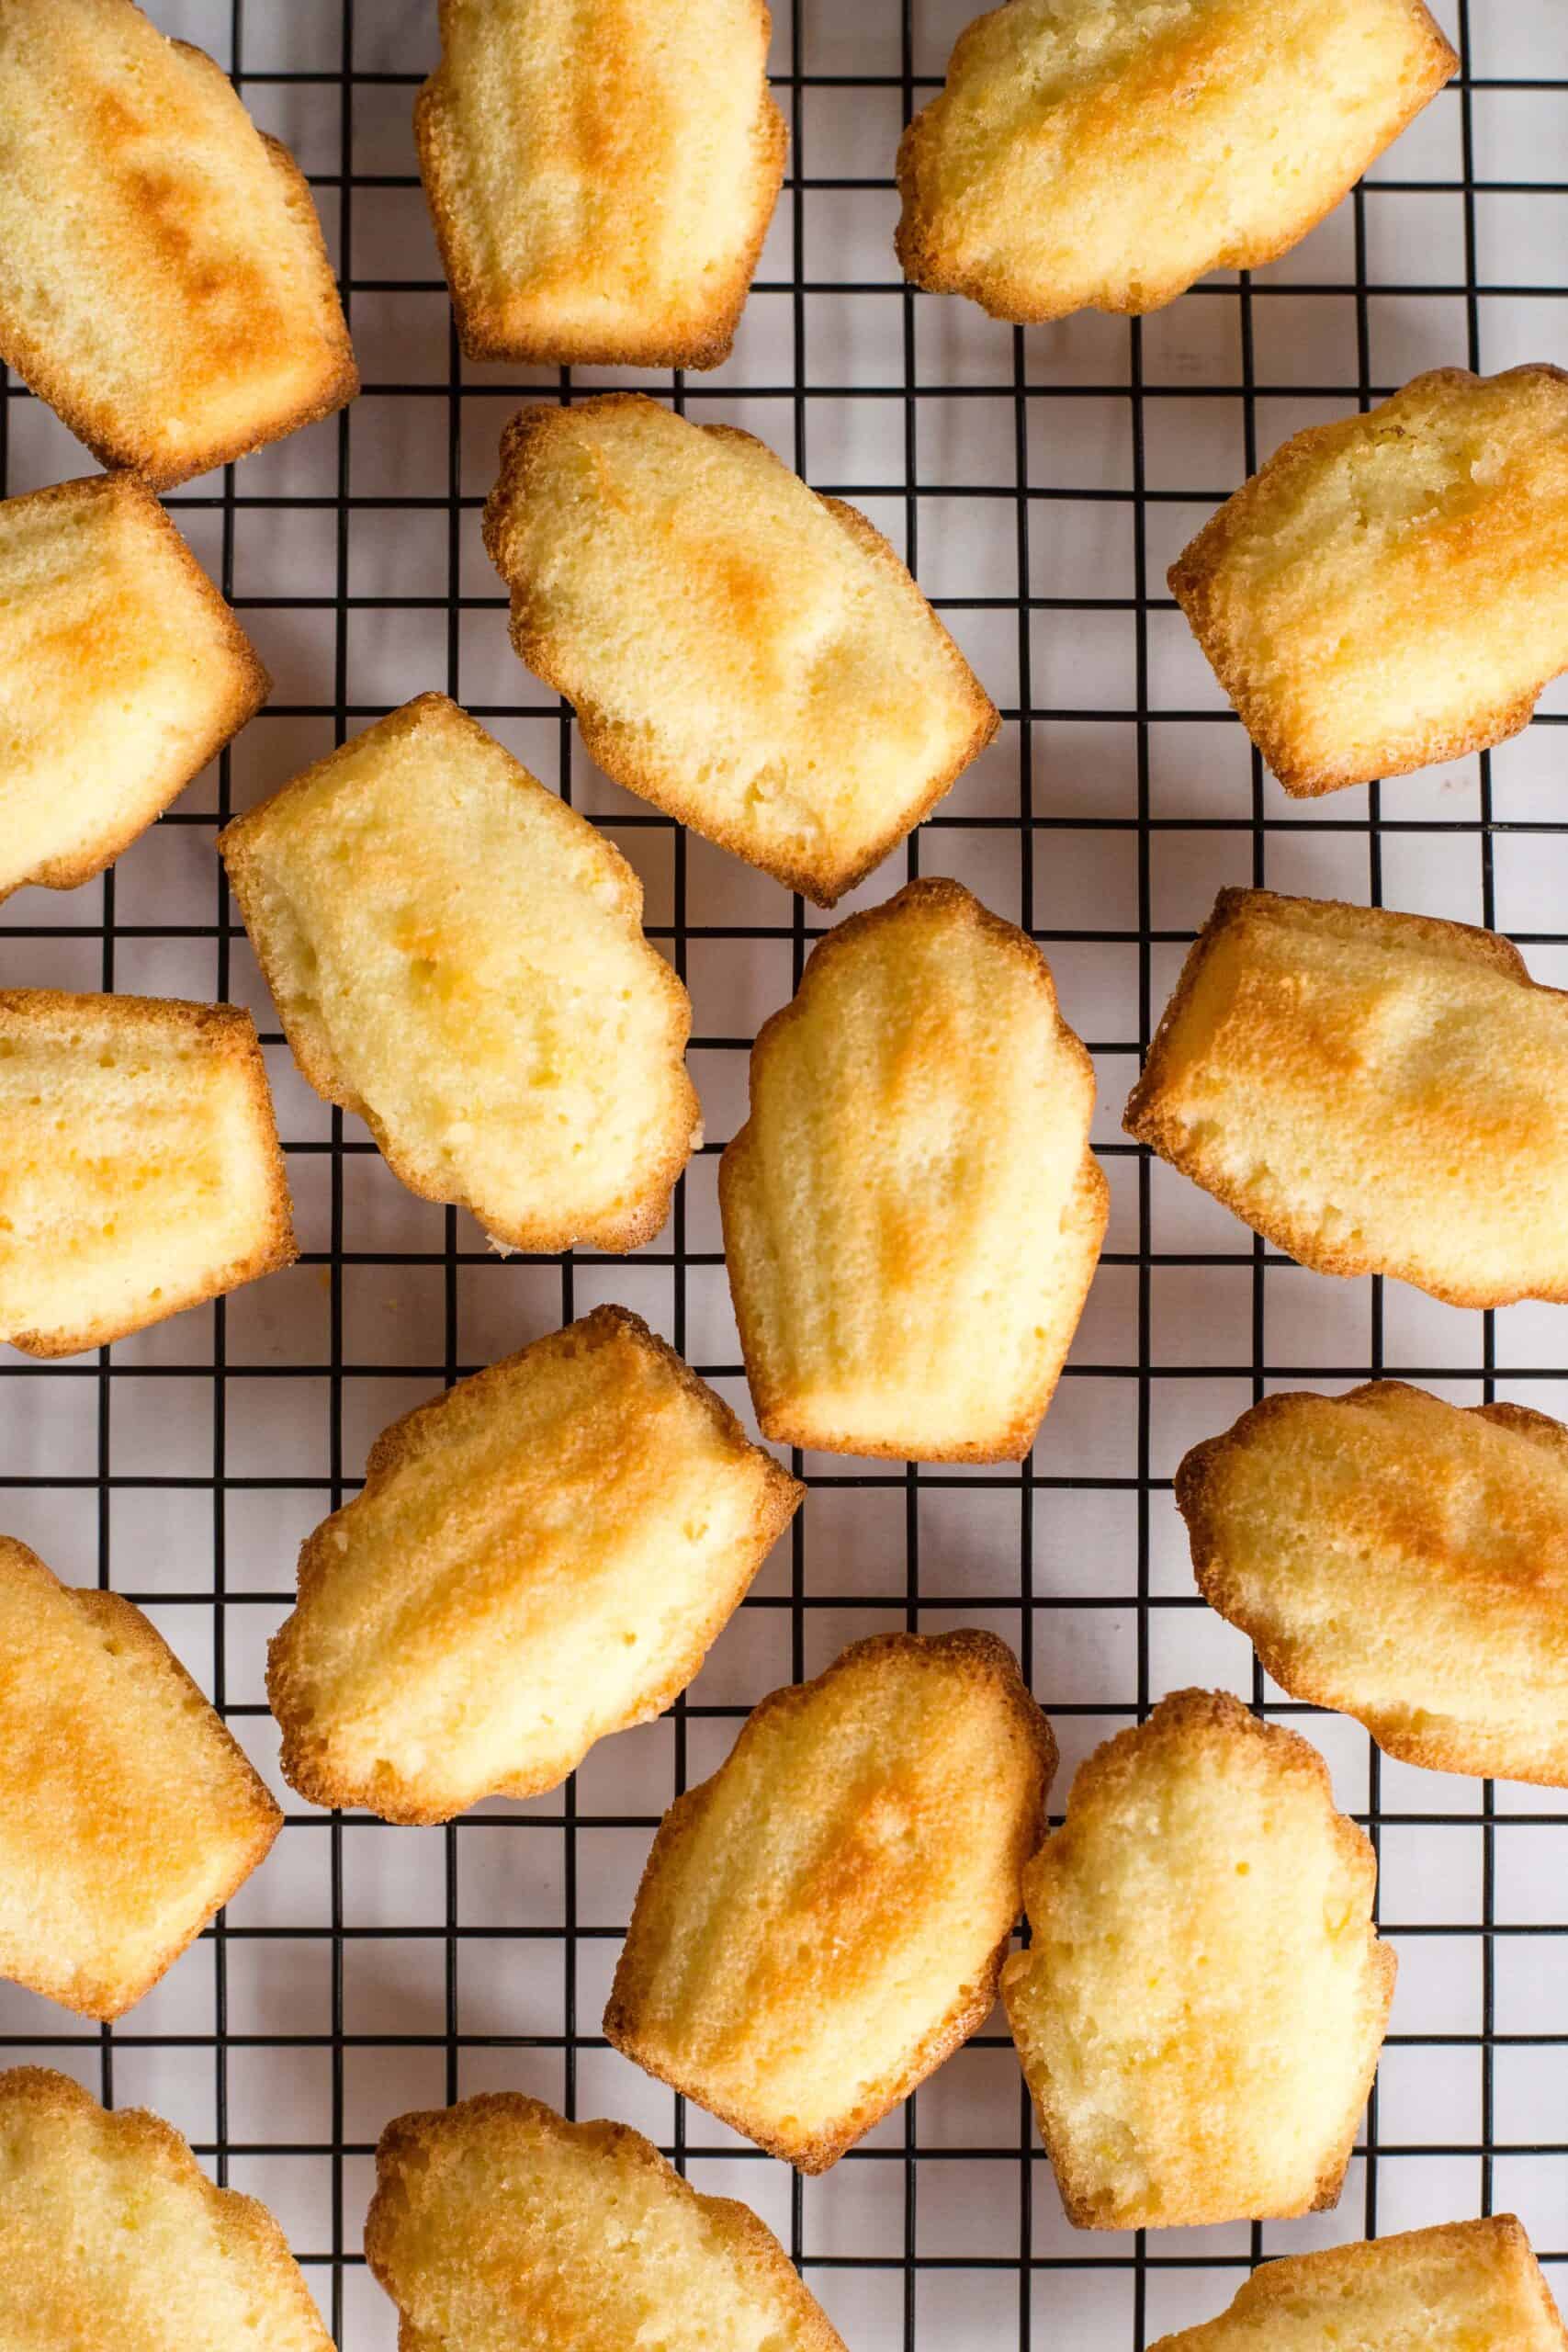 Dairy-free madeleines cooling on a wire rack.